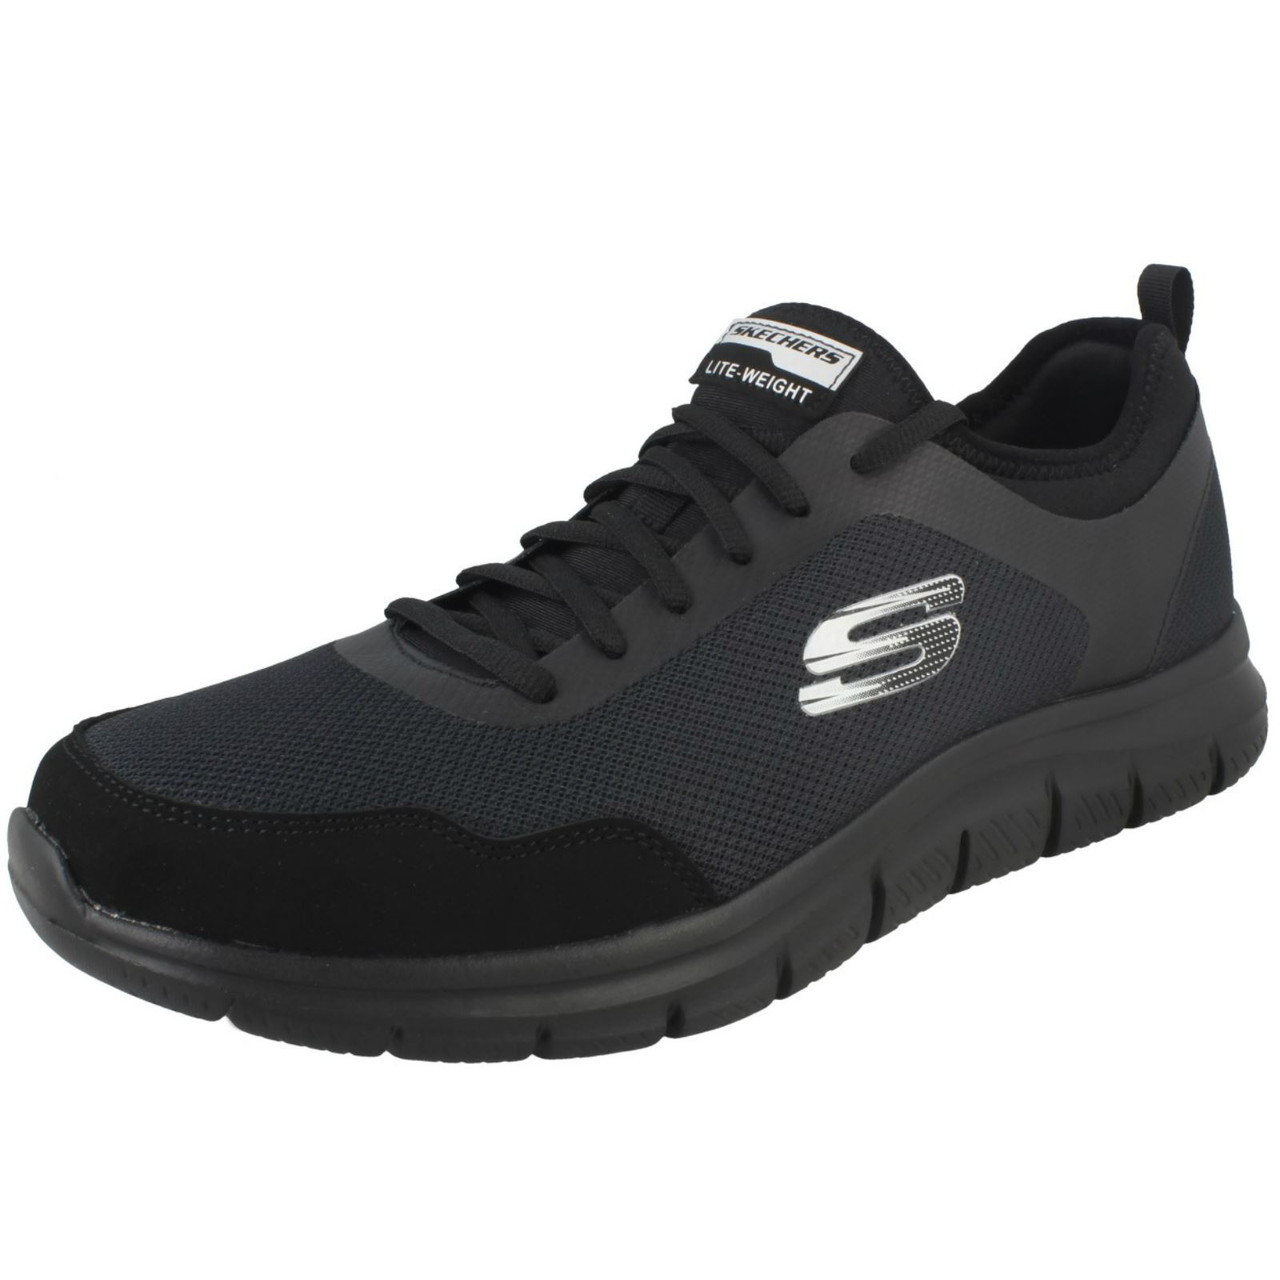 mens skechers trainers size 11